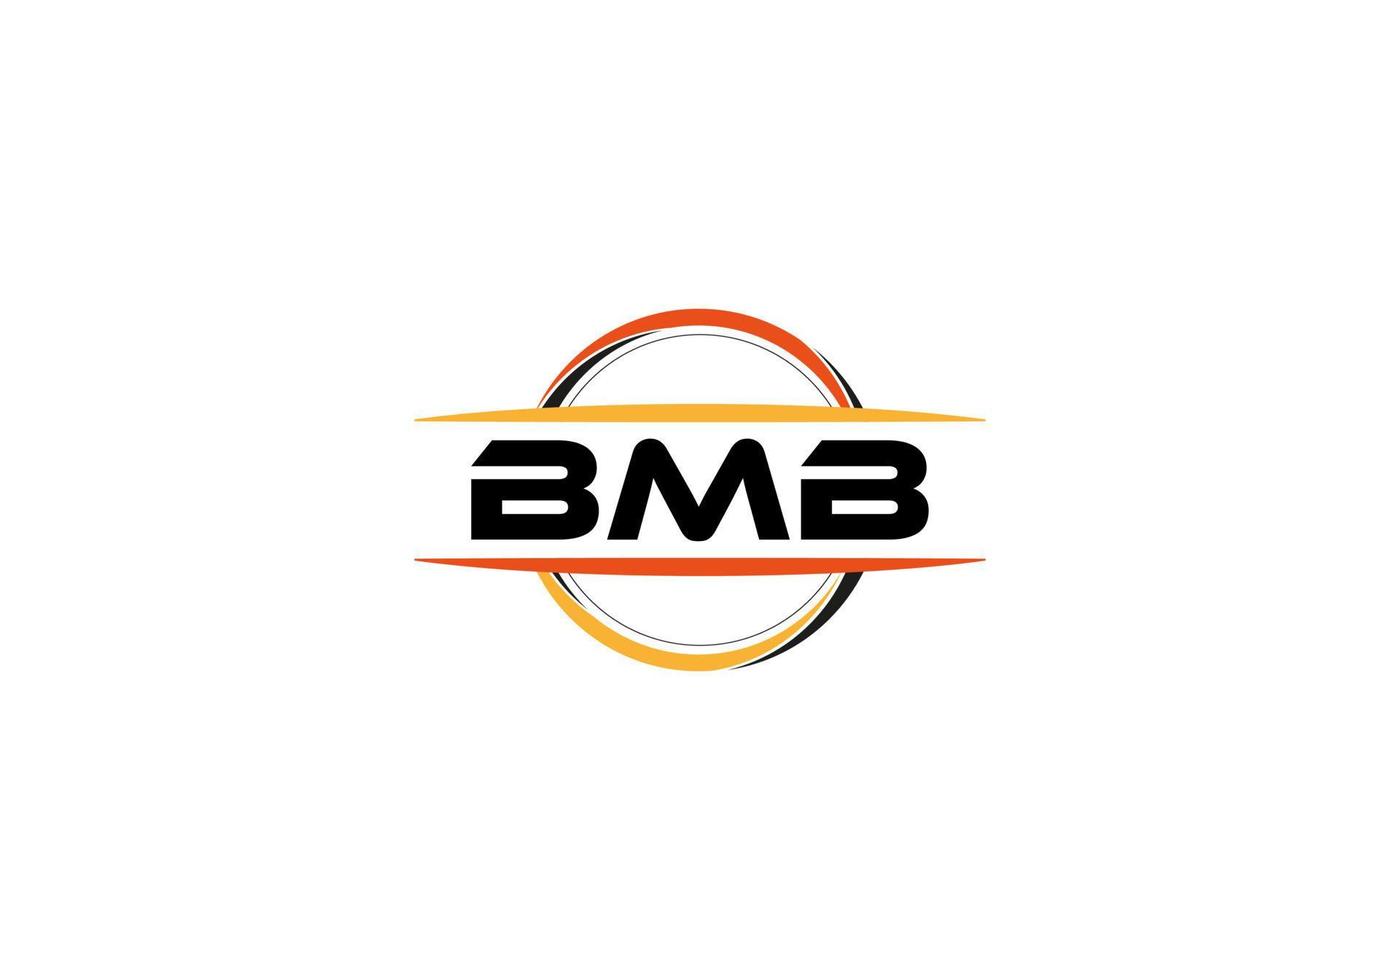 BMB letter royalty ellipse shape logo. BMB brush art logo. BMB logo for a company, business, and commercial use. vector